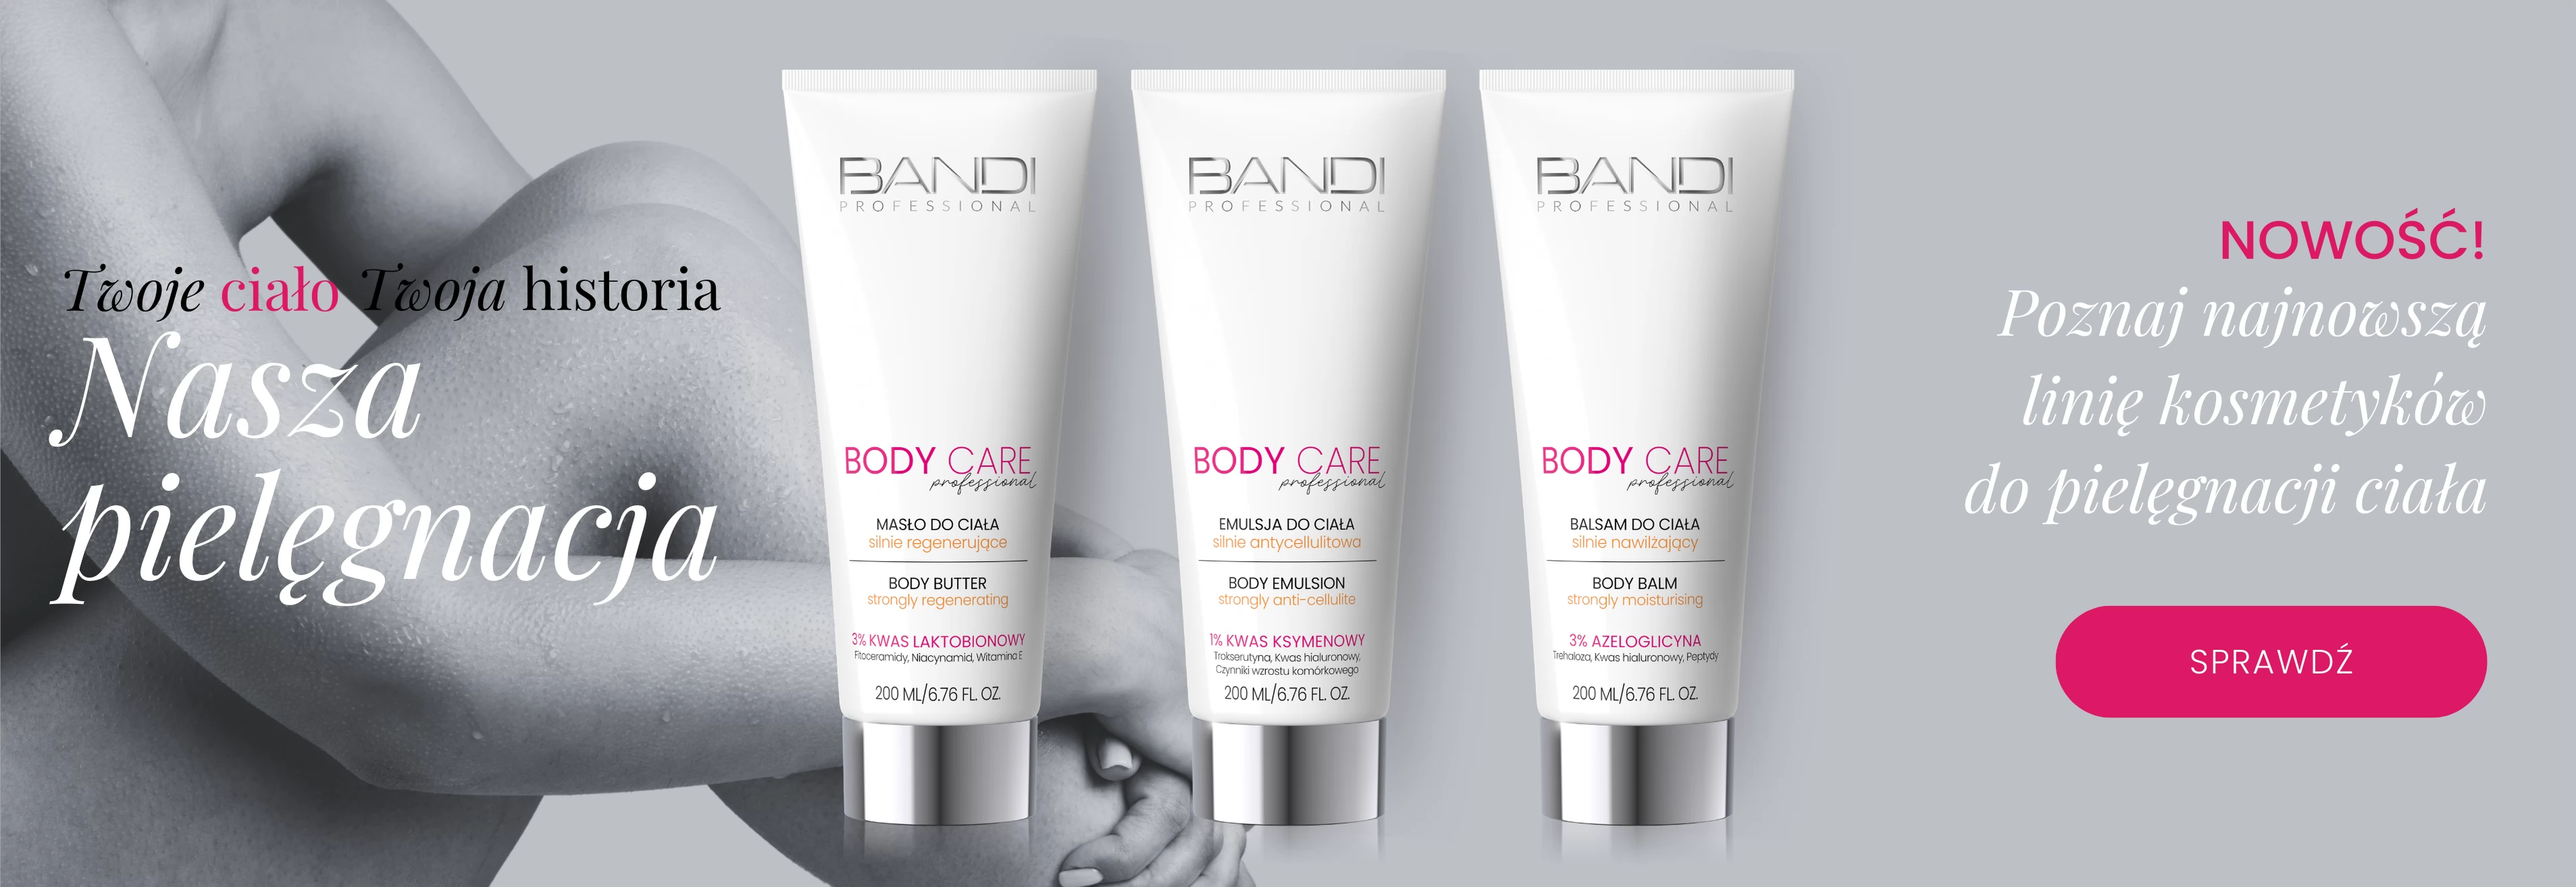 body care nowo